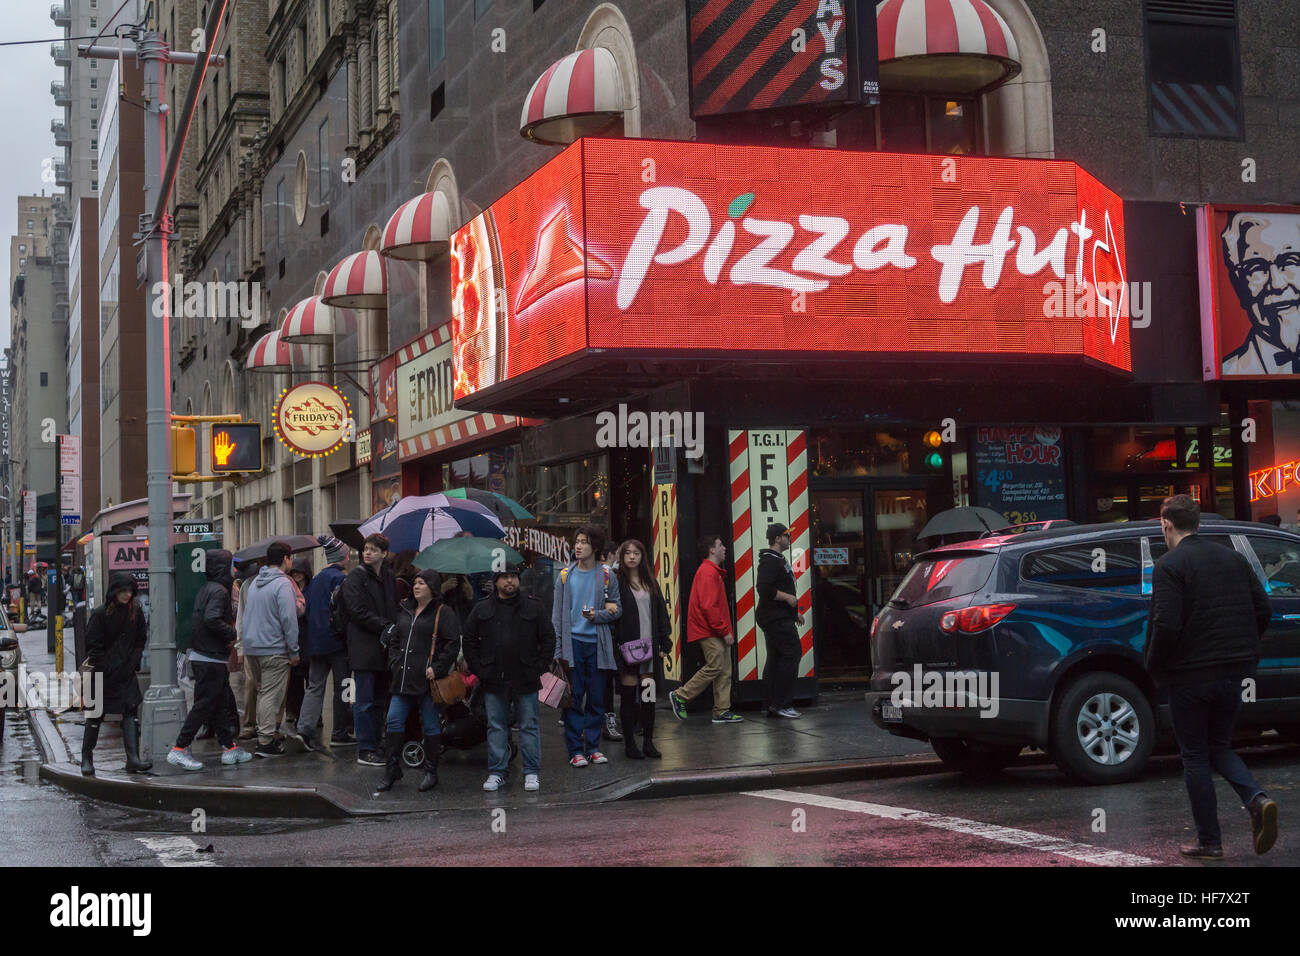 Advertising for Pizza Hut in a storefront in New York ...